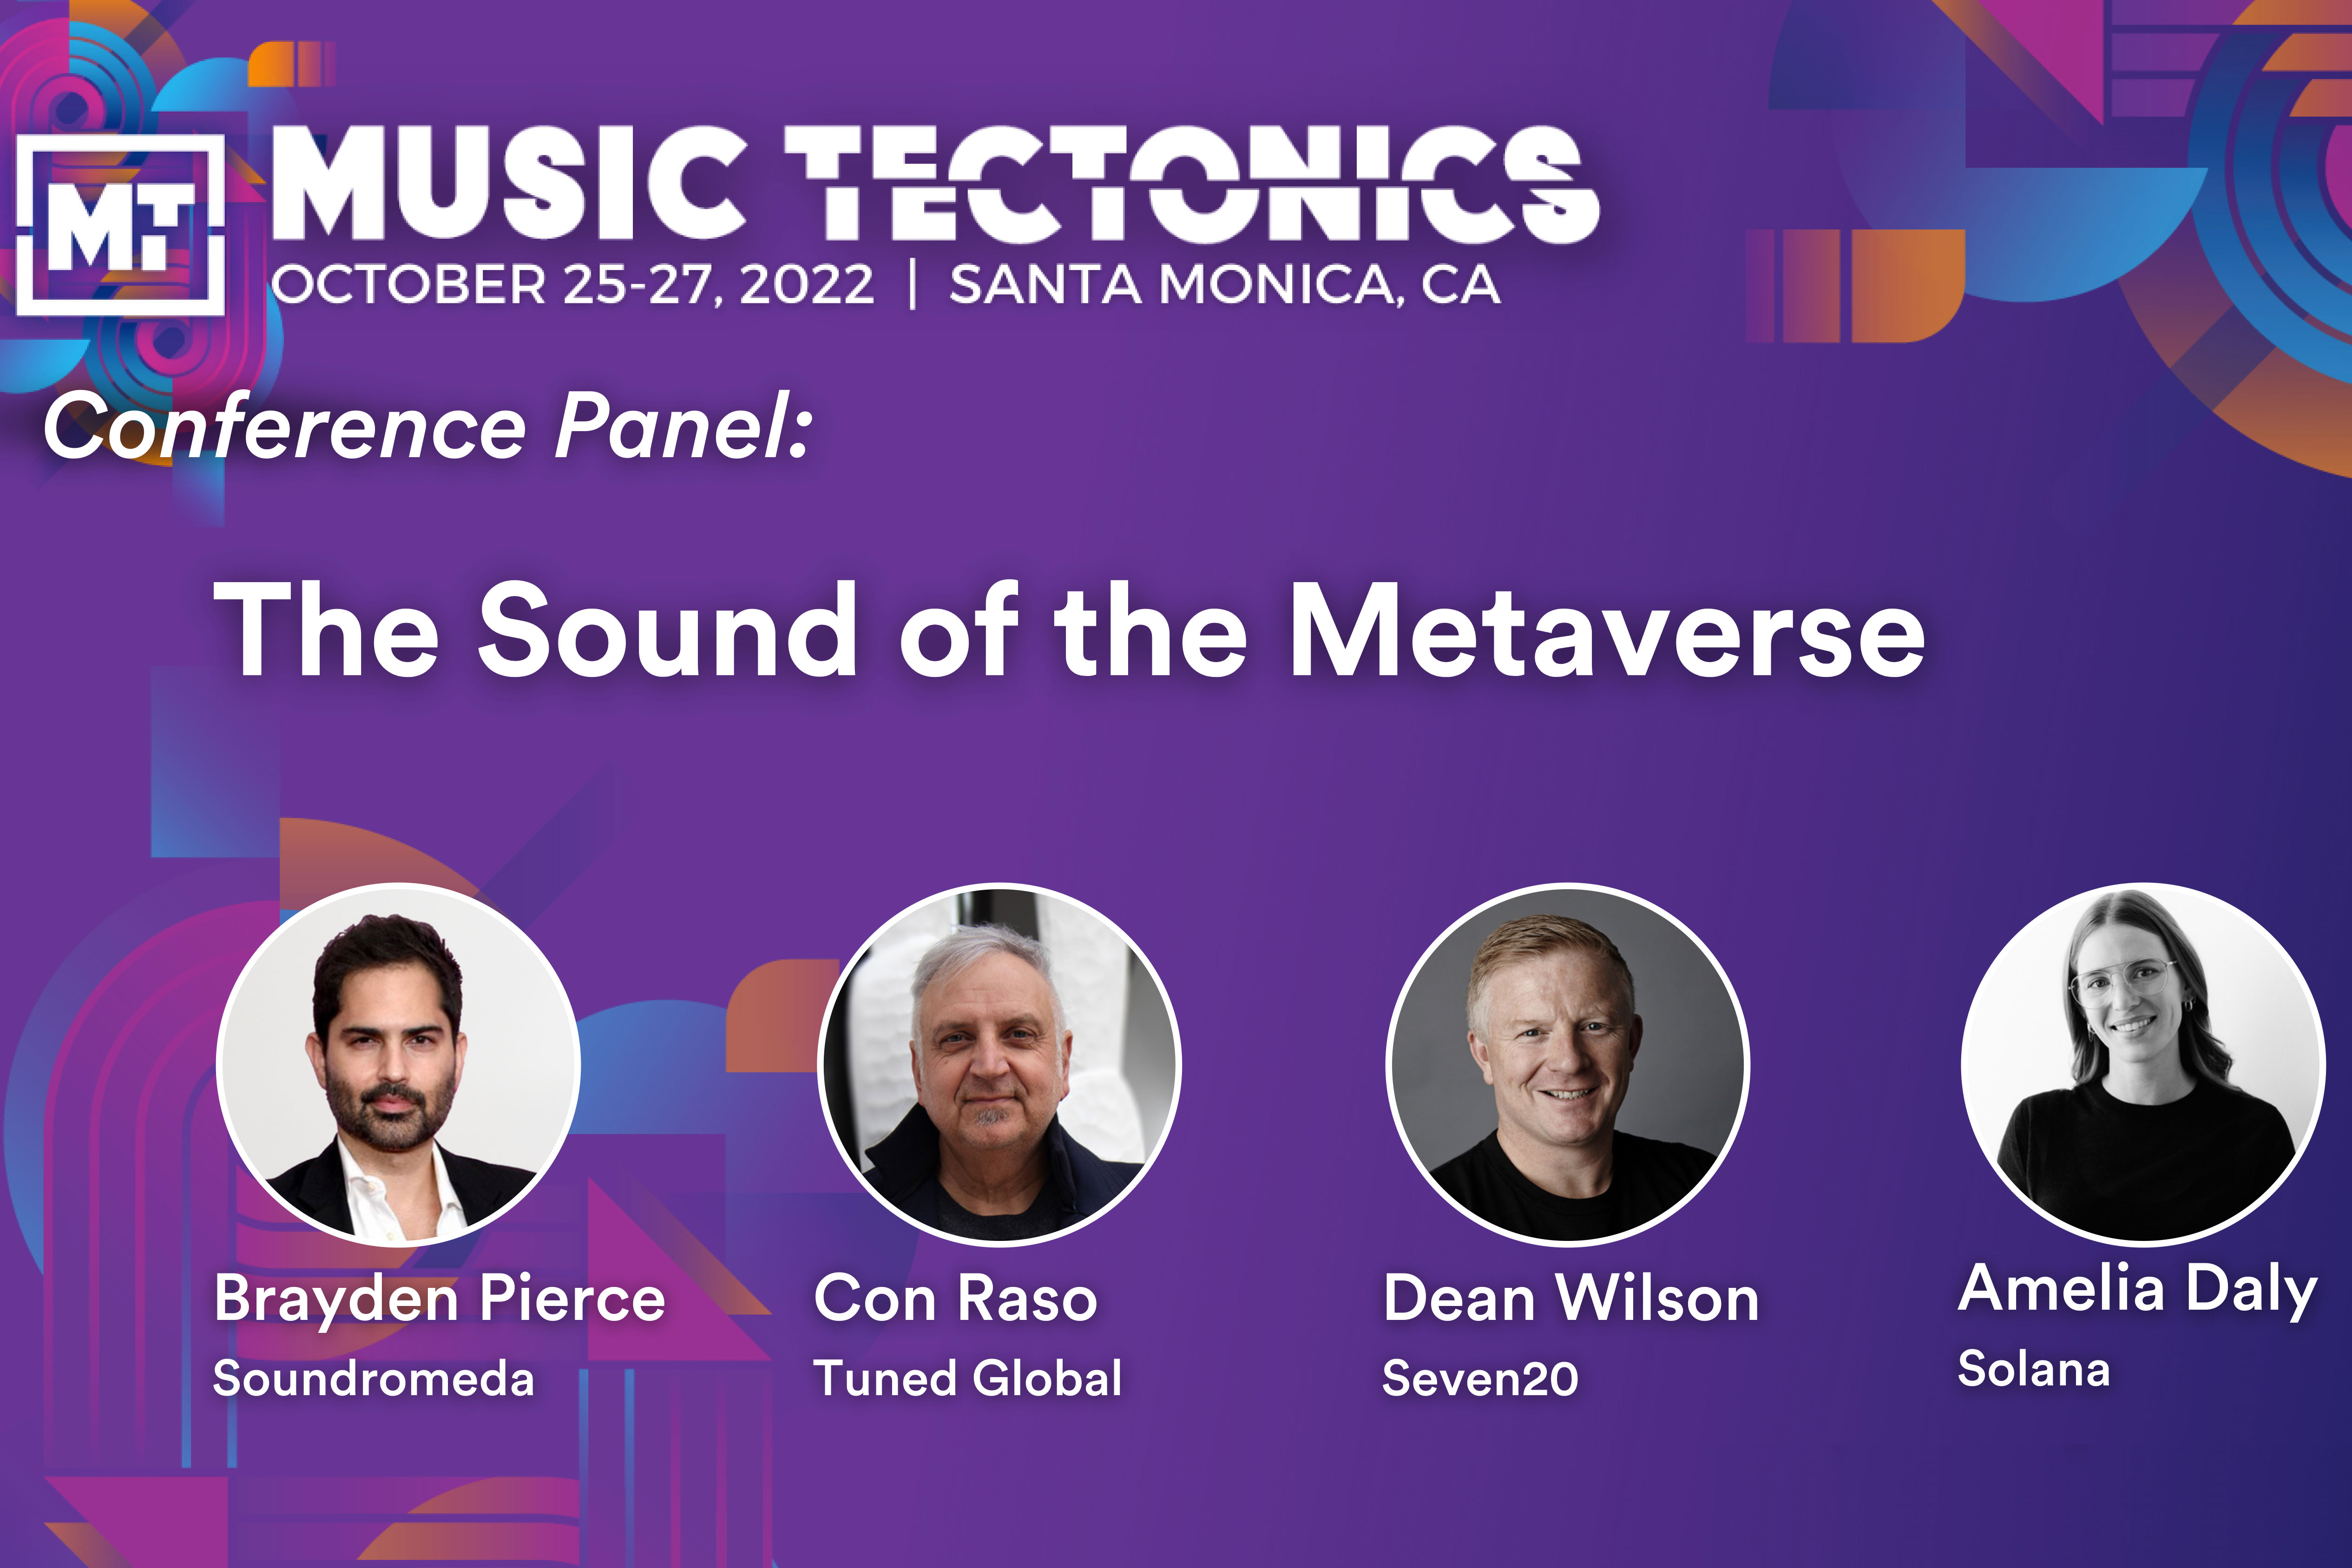 Panel: The Sound of the Metaverse